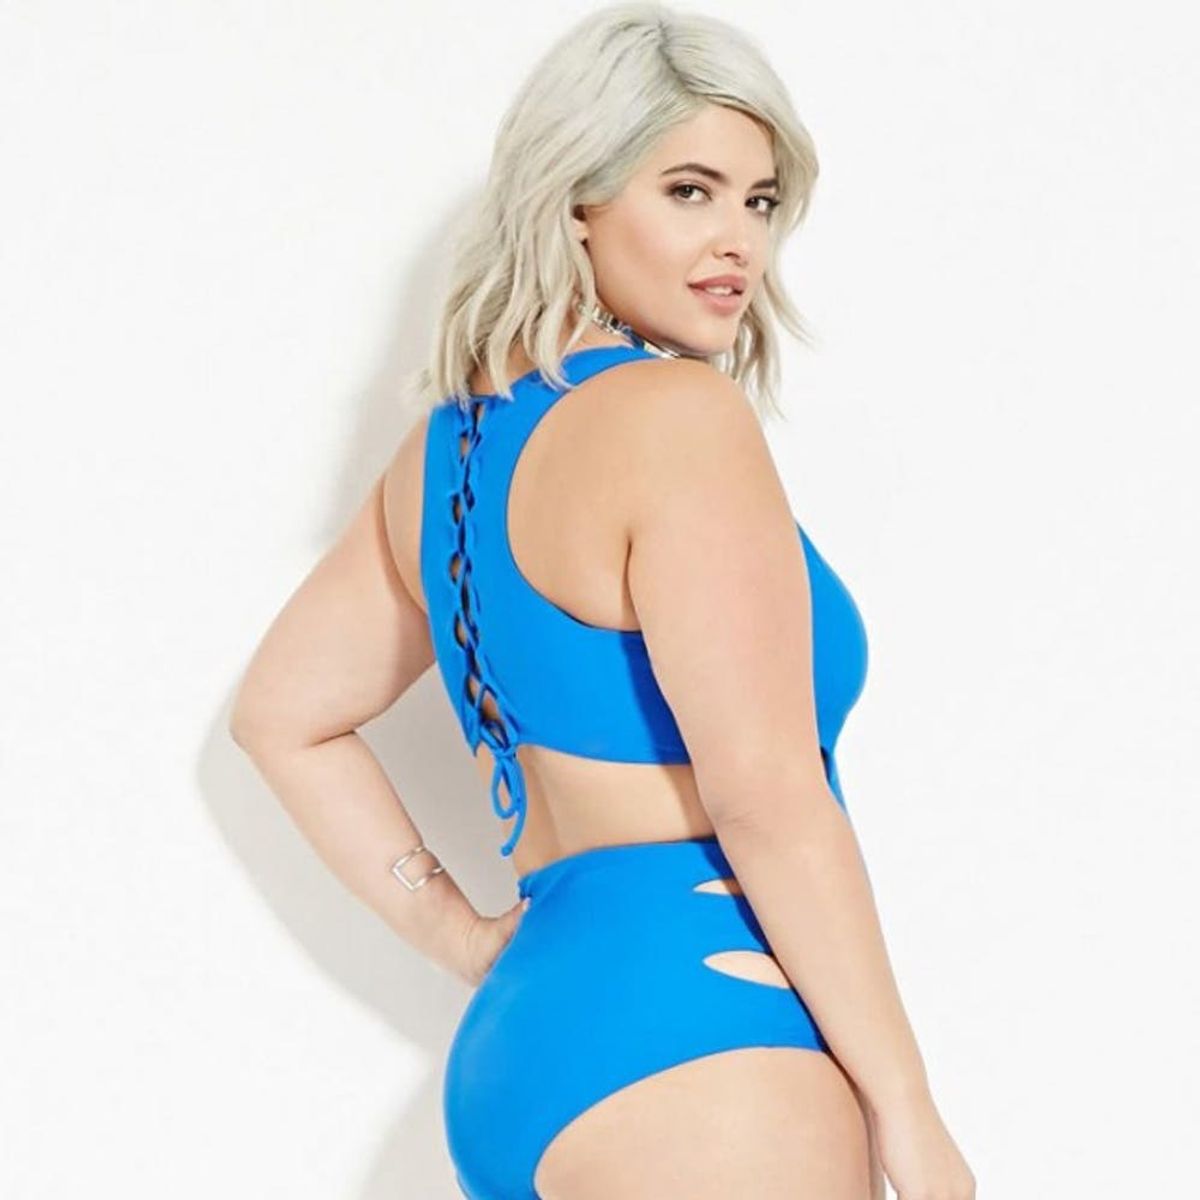 14 Bathing Suits That Will Make You Excited for Spring Break